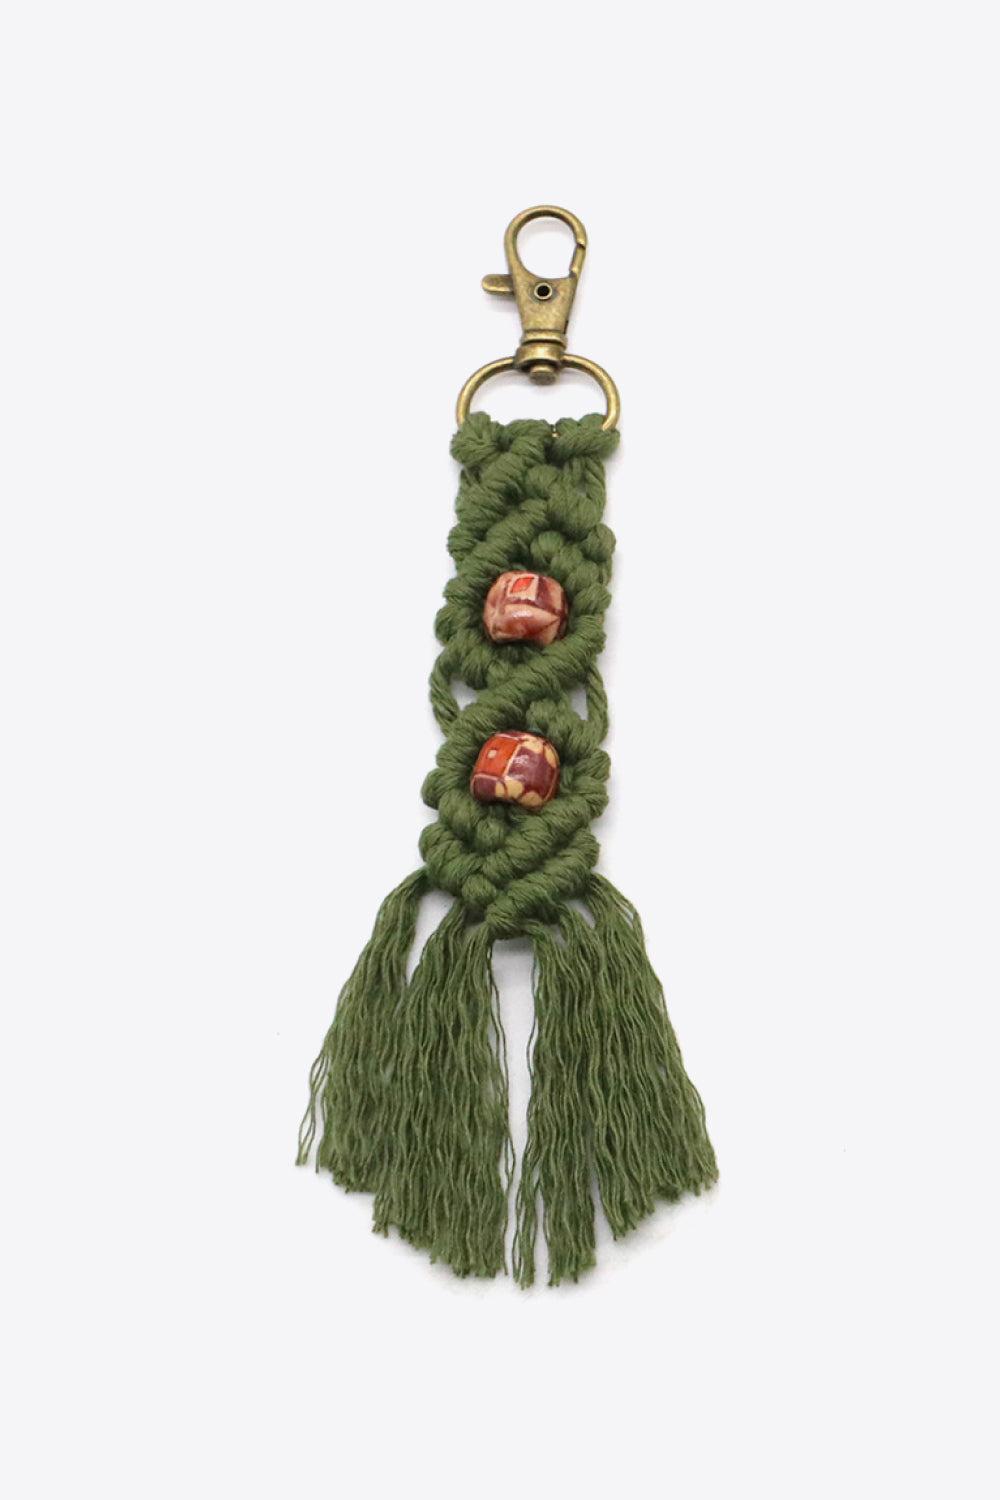 Trendsi Cupid Beauty Supplies Army Green / One Size Keychains Assorted 4-Pack Handmade Macrame Fringe Keychain